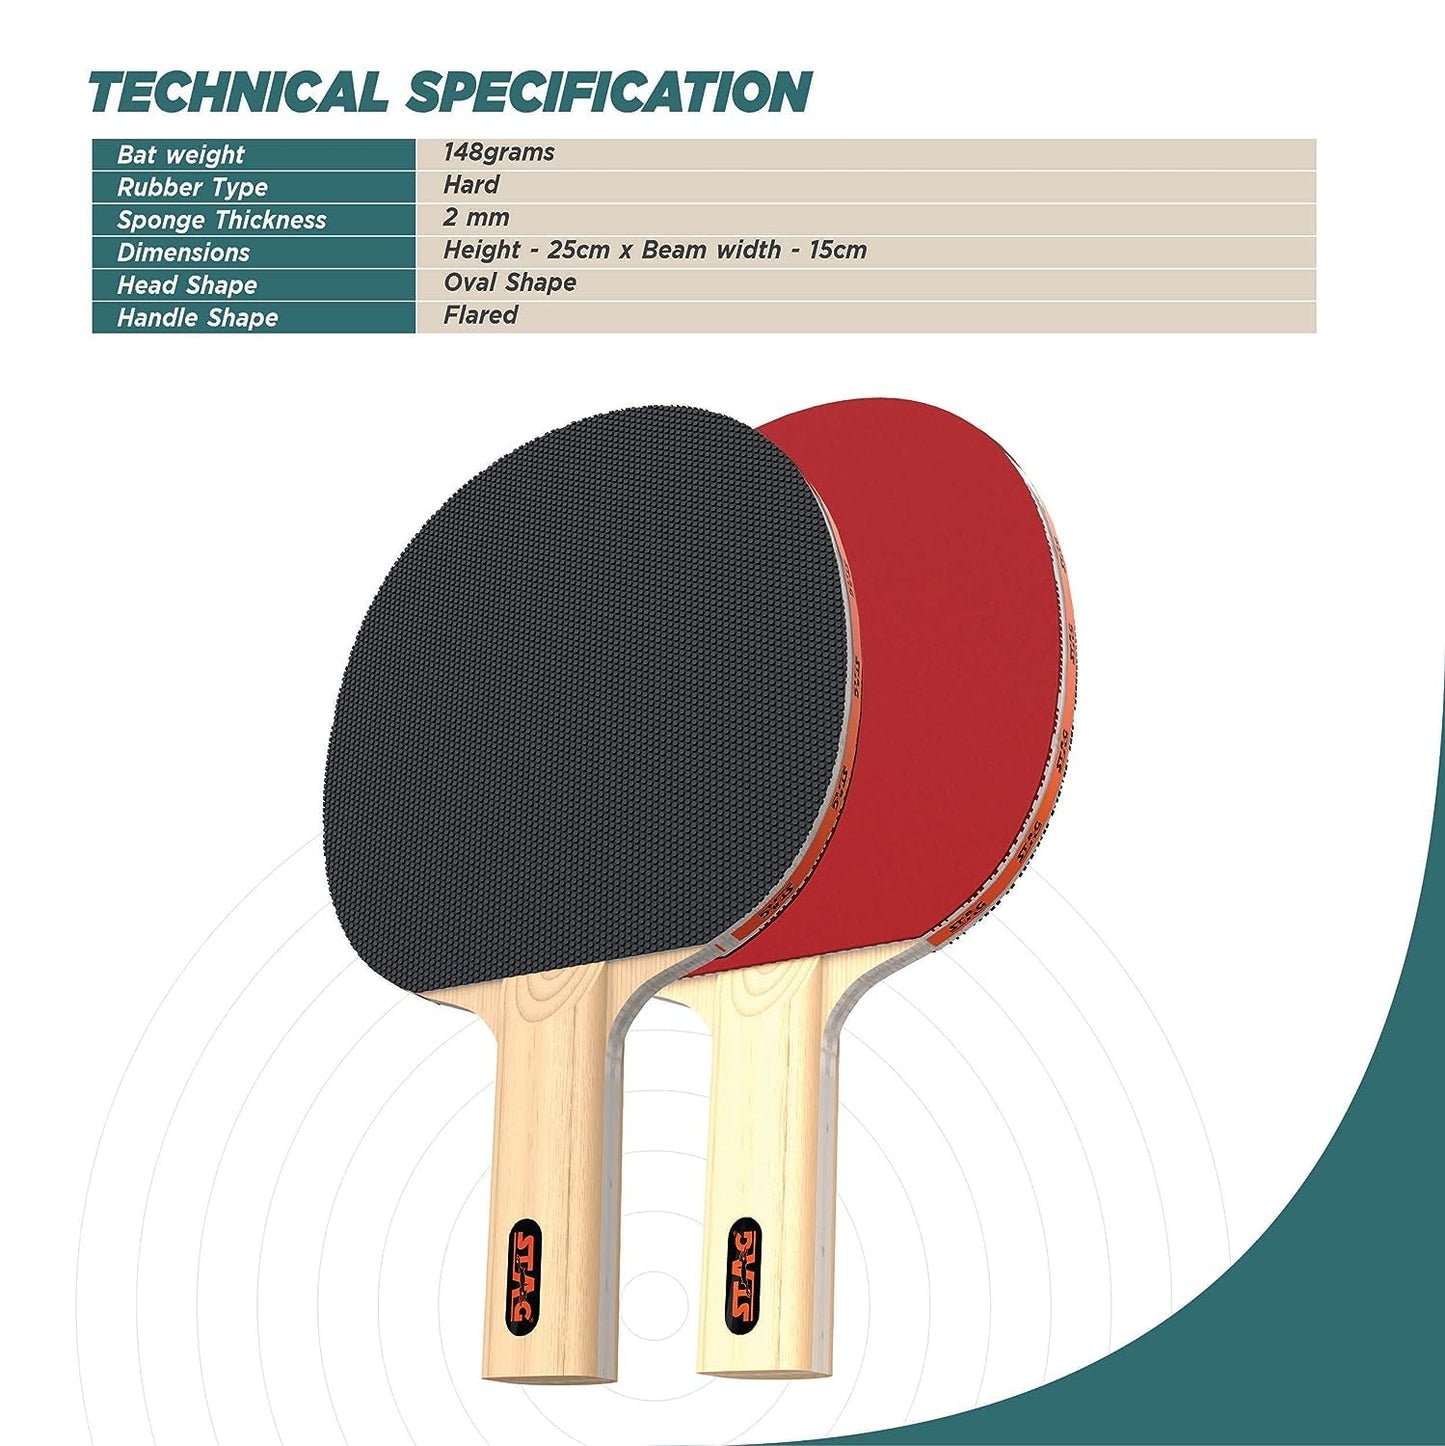 STAG 1 Star Table Tennis Playset (2 Racquets & 3 Balls) (White), (Model: 1 Star Playset)